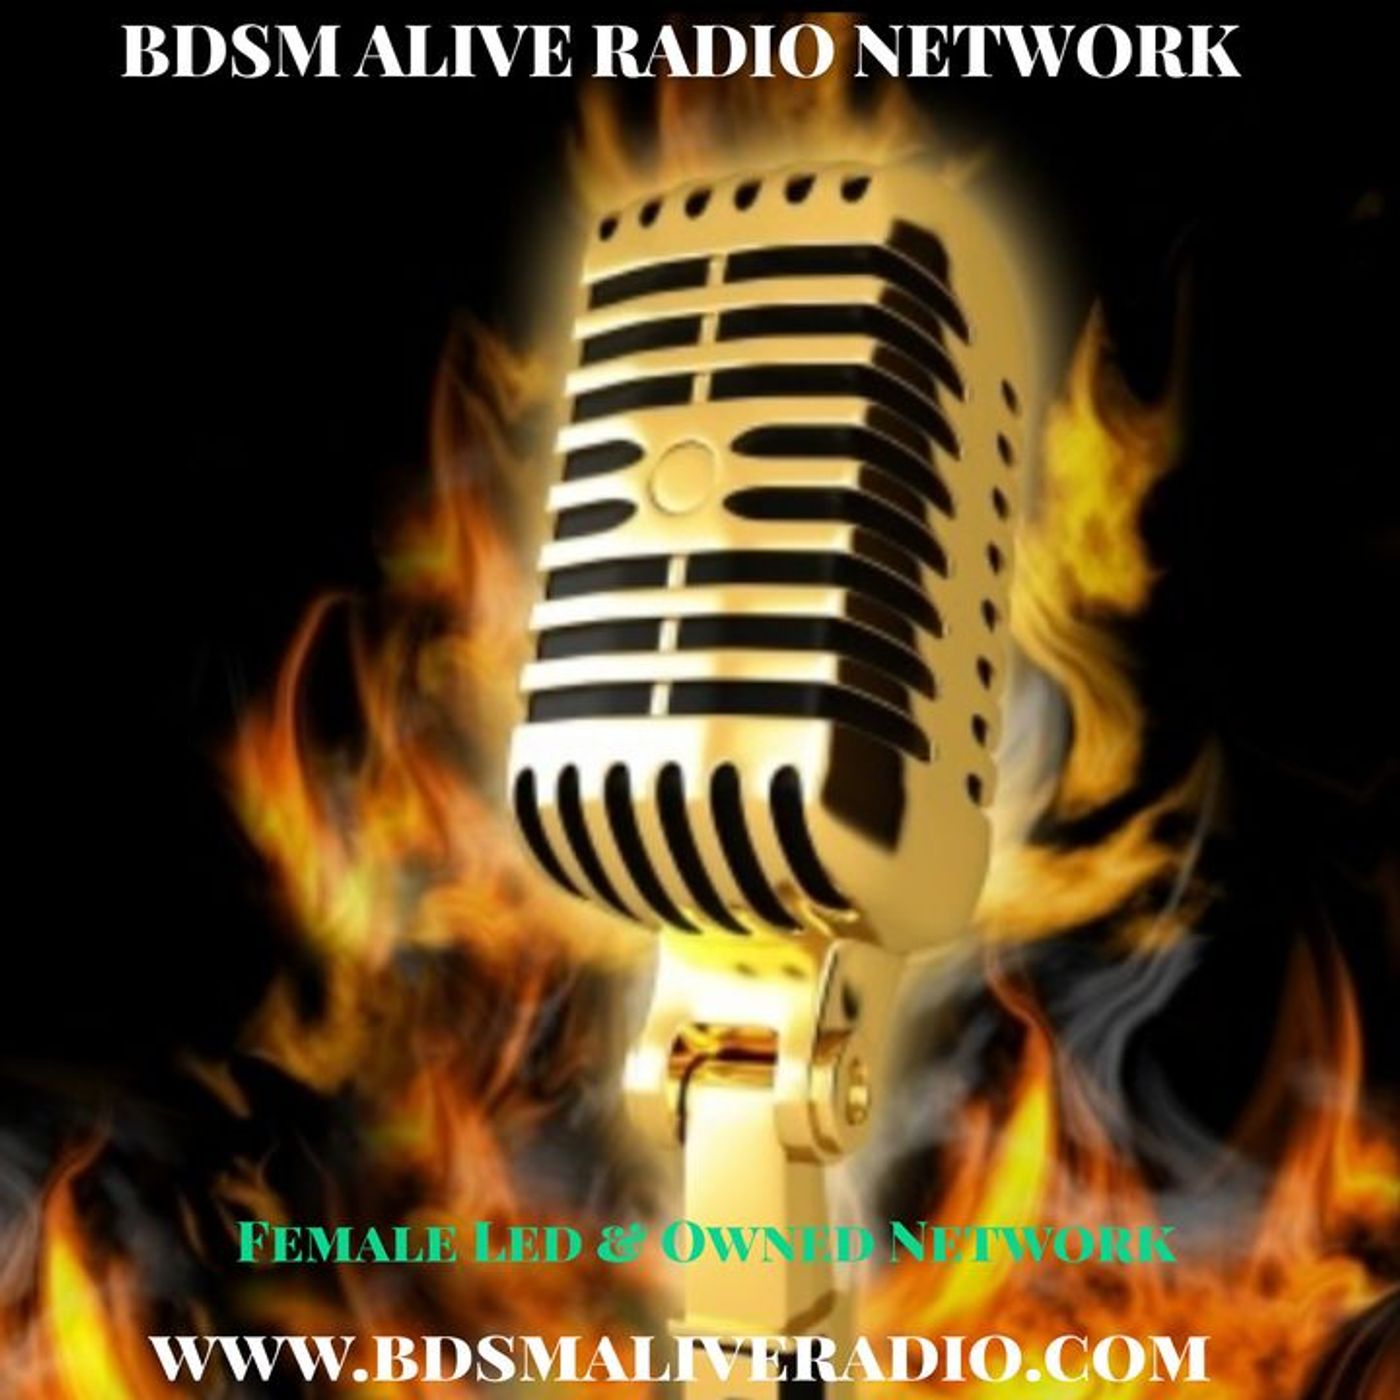 03/23/2022 BDSM ALIVE RADIO NETWORK MistressCandy69 Discusses New Show The Whip Appeal